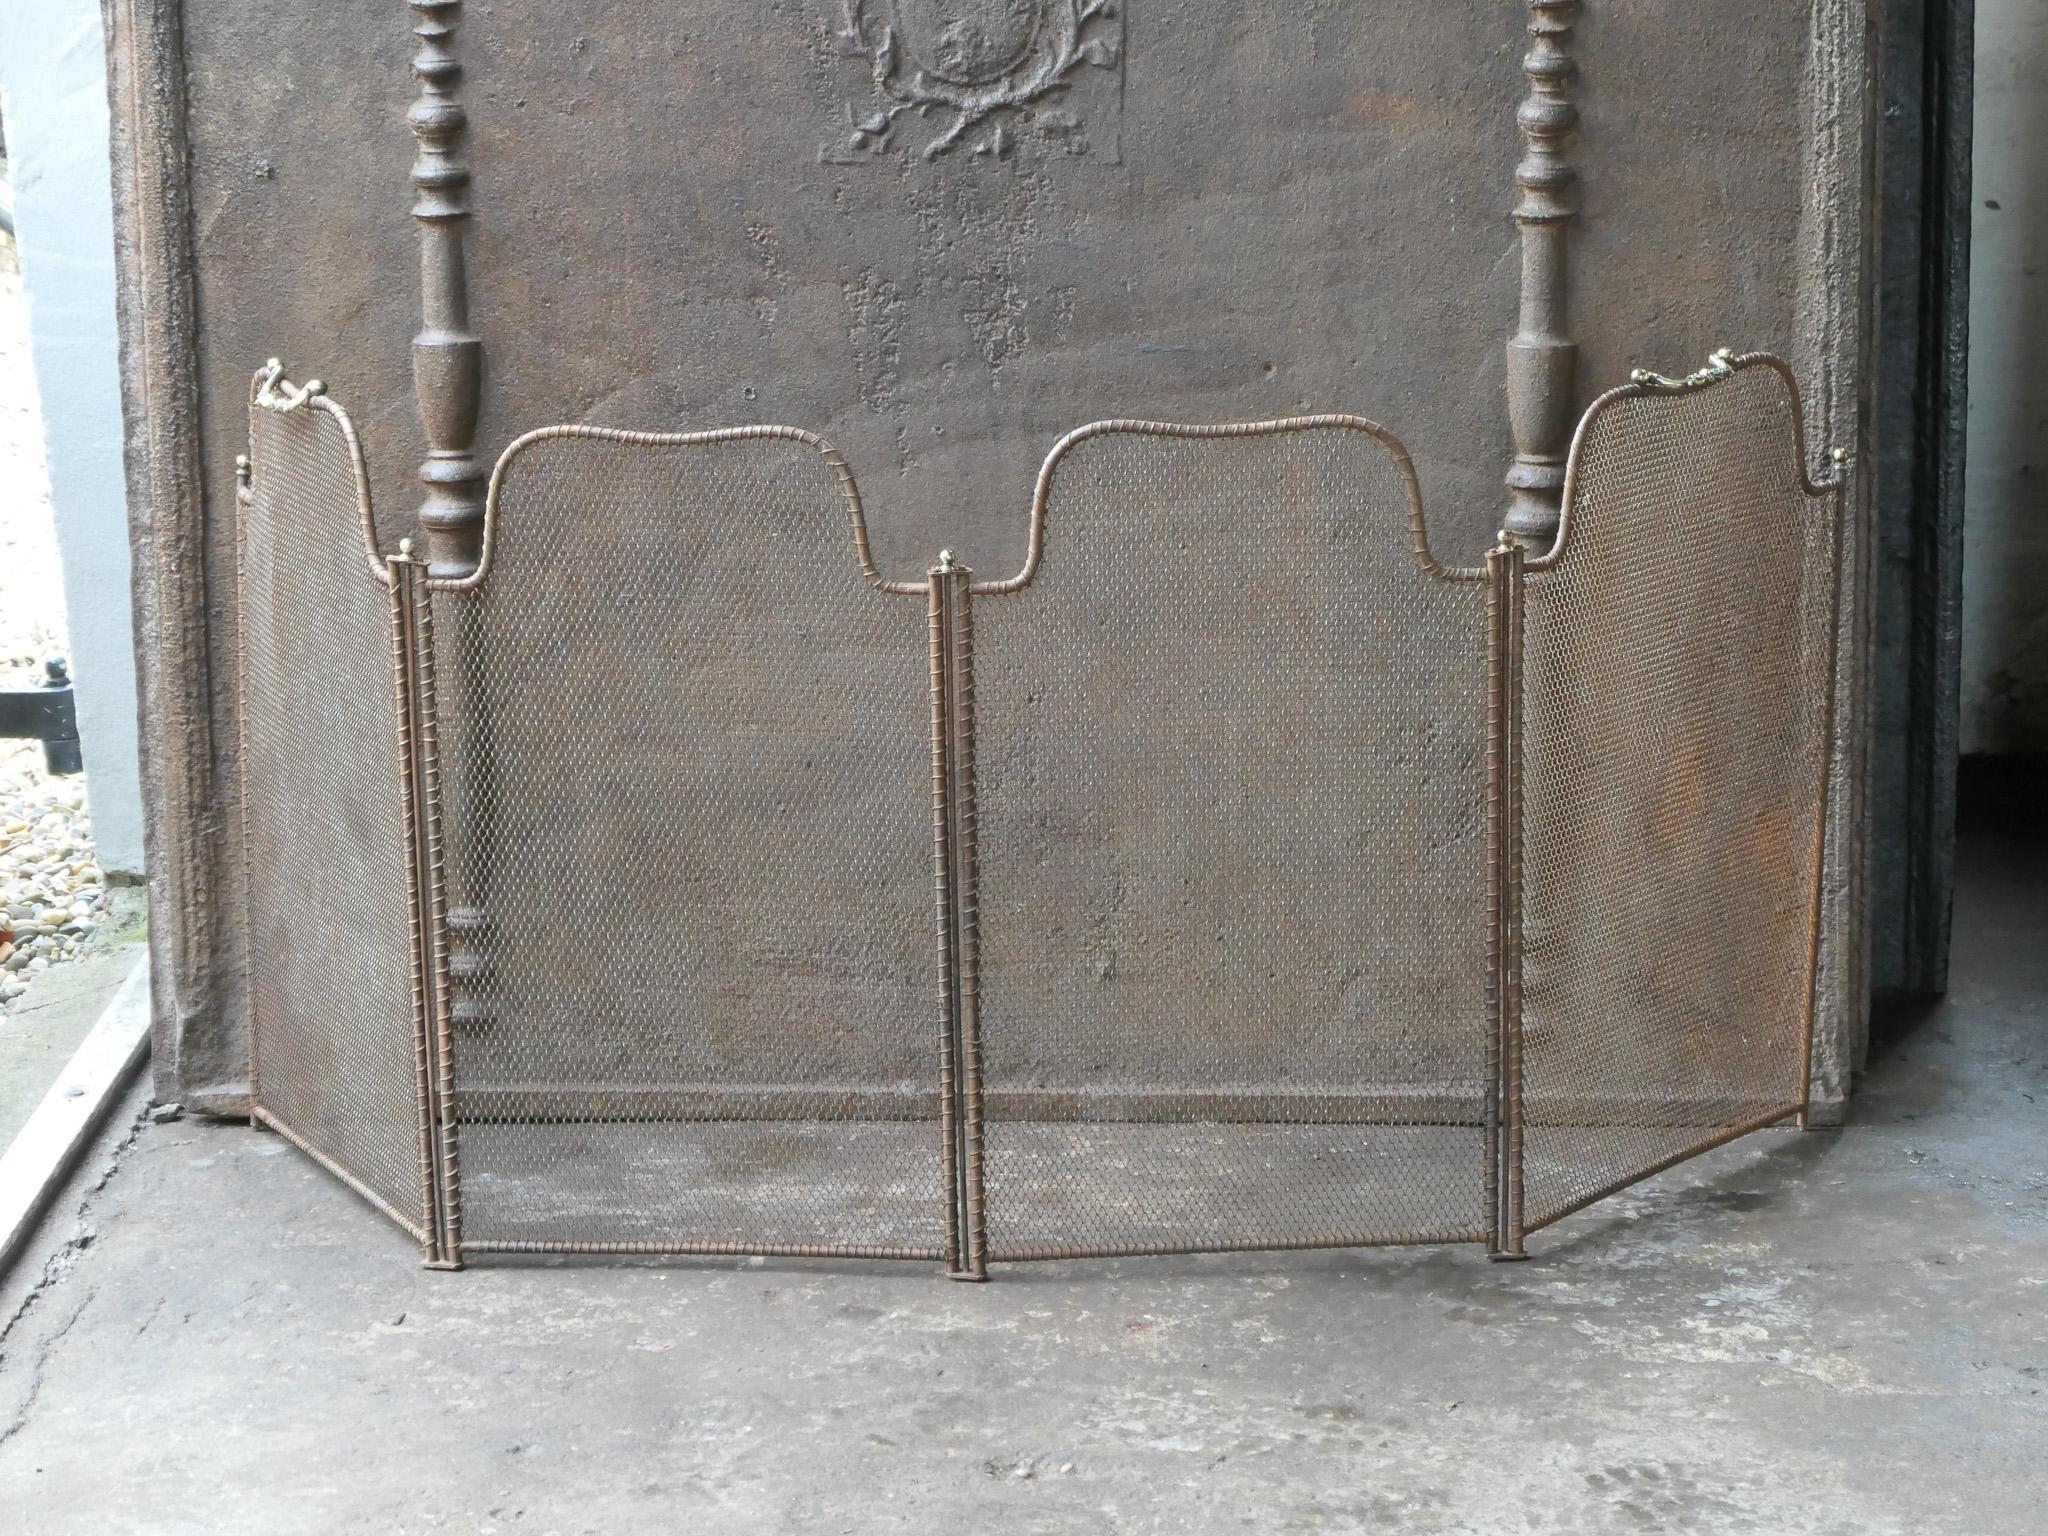 19th century French Napoleon III 4-panel fireplace screen. The screen is made of brass, iron and iron mesh. 

It is in a good condition and is fit for use in front of the fireplace.